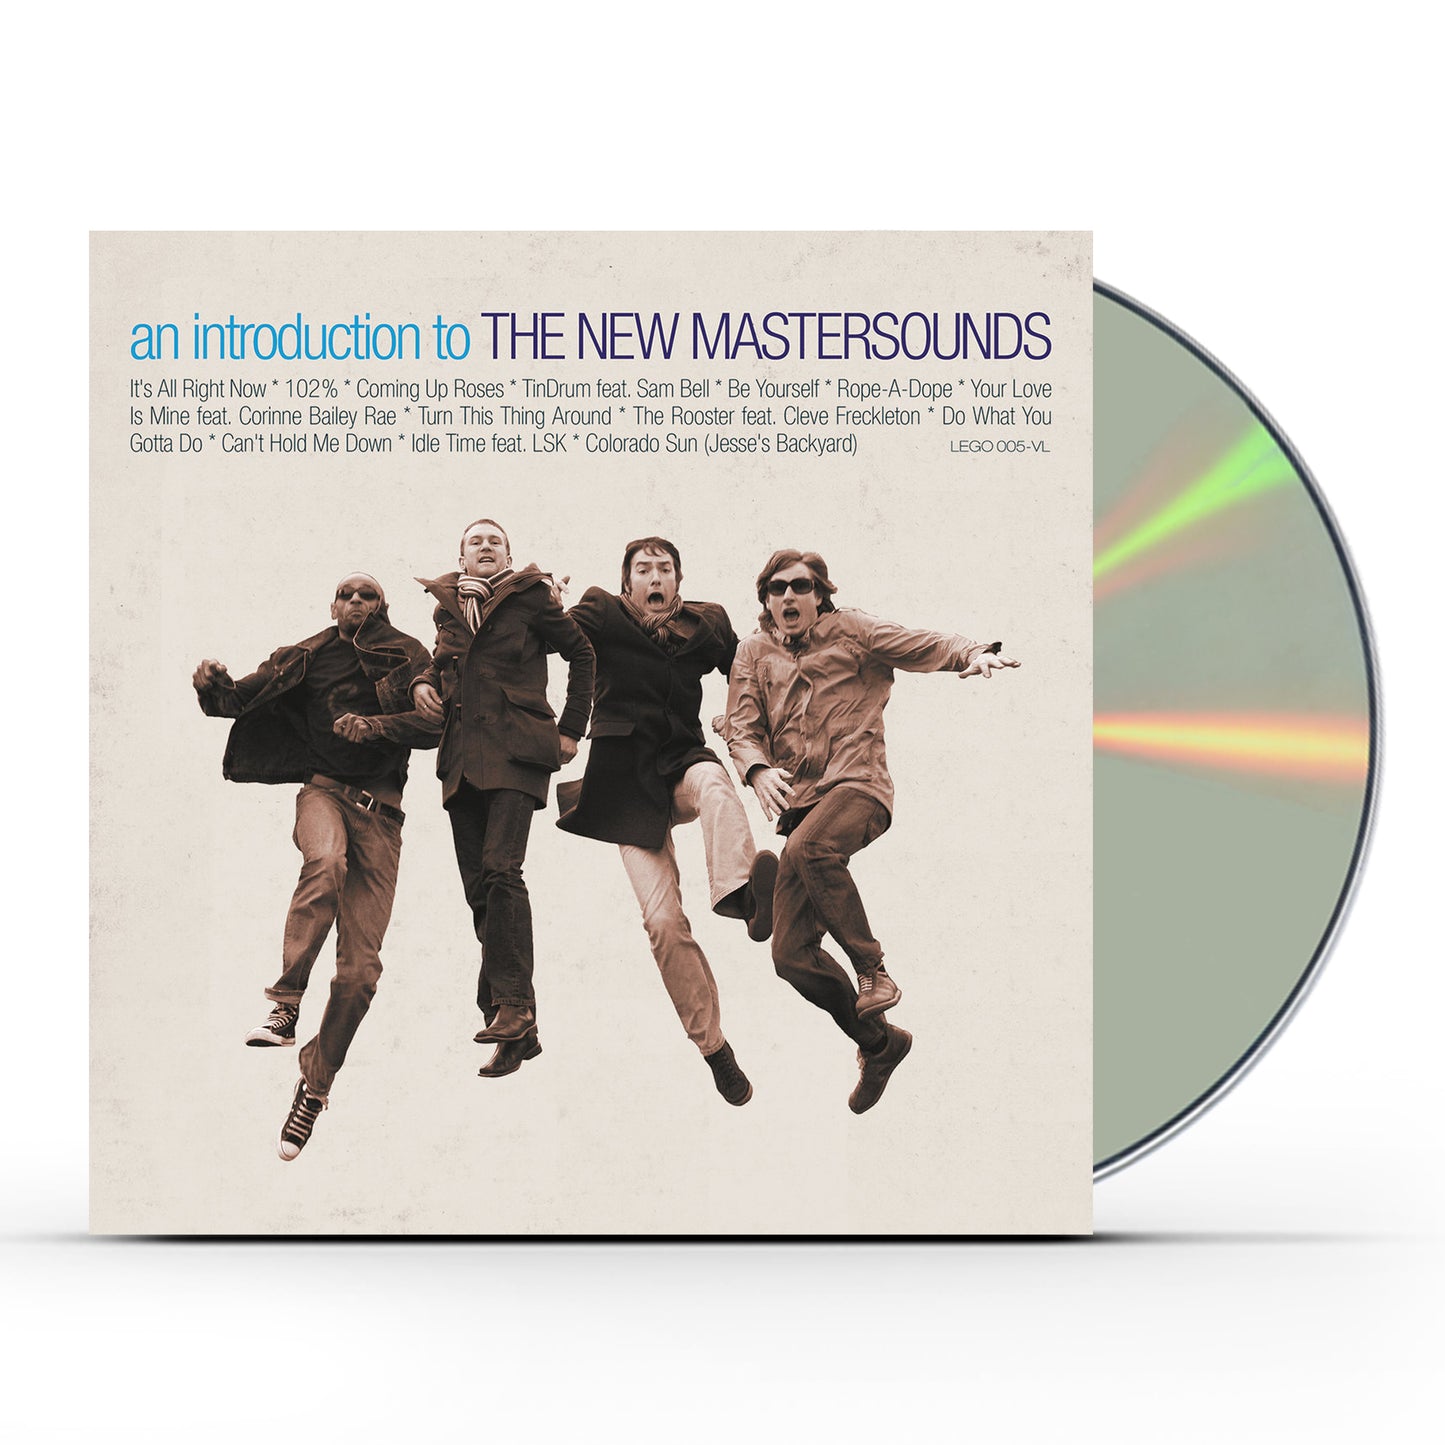 An Introduction To The New Mastersounds (CD)